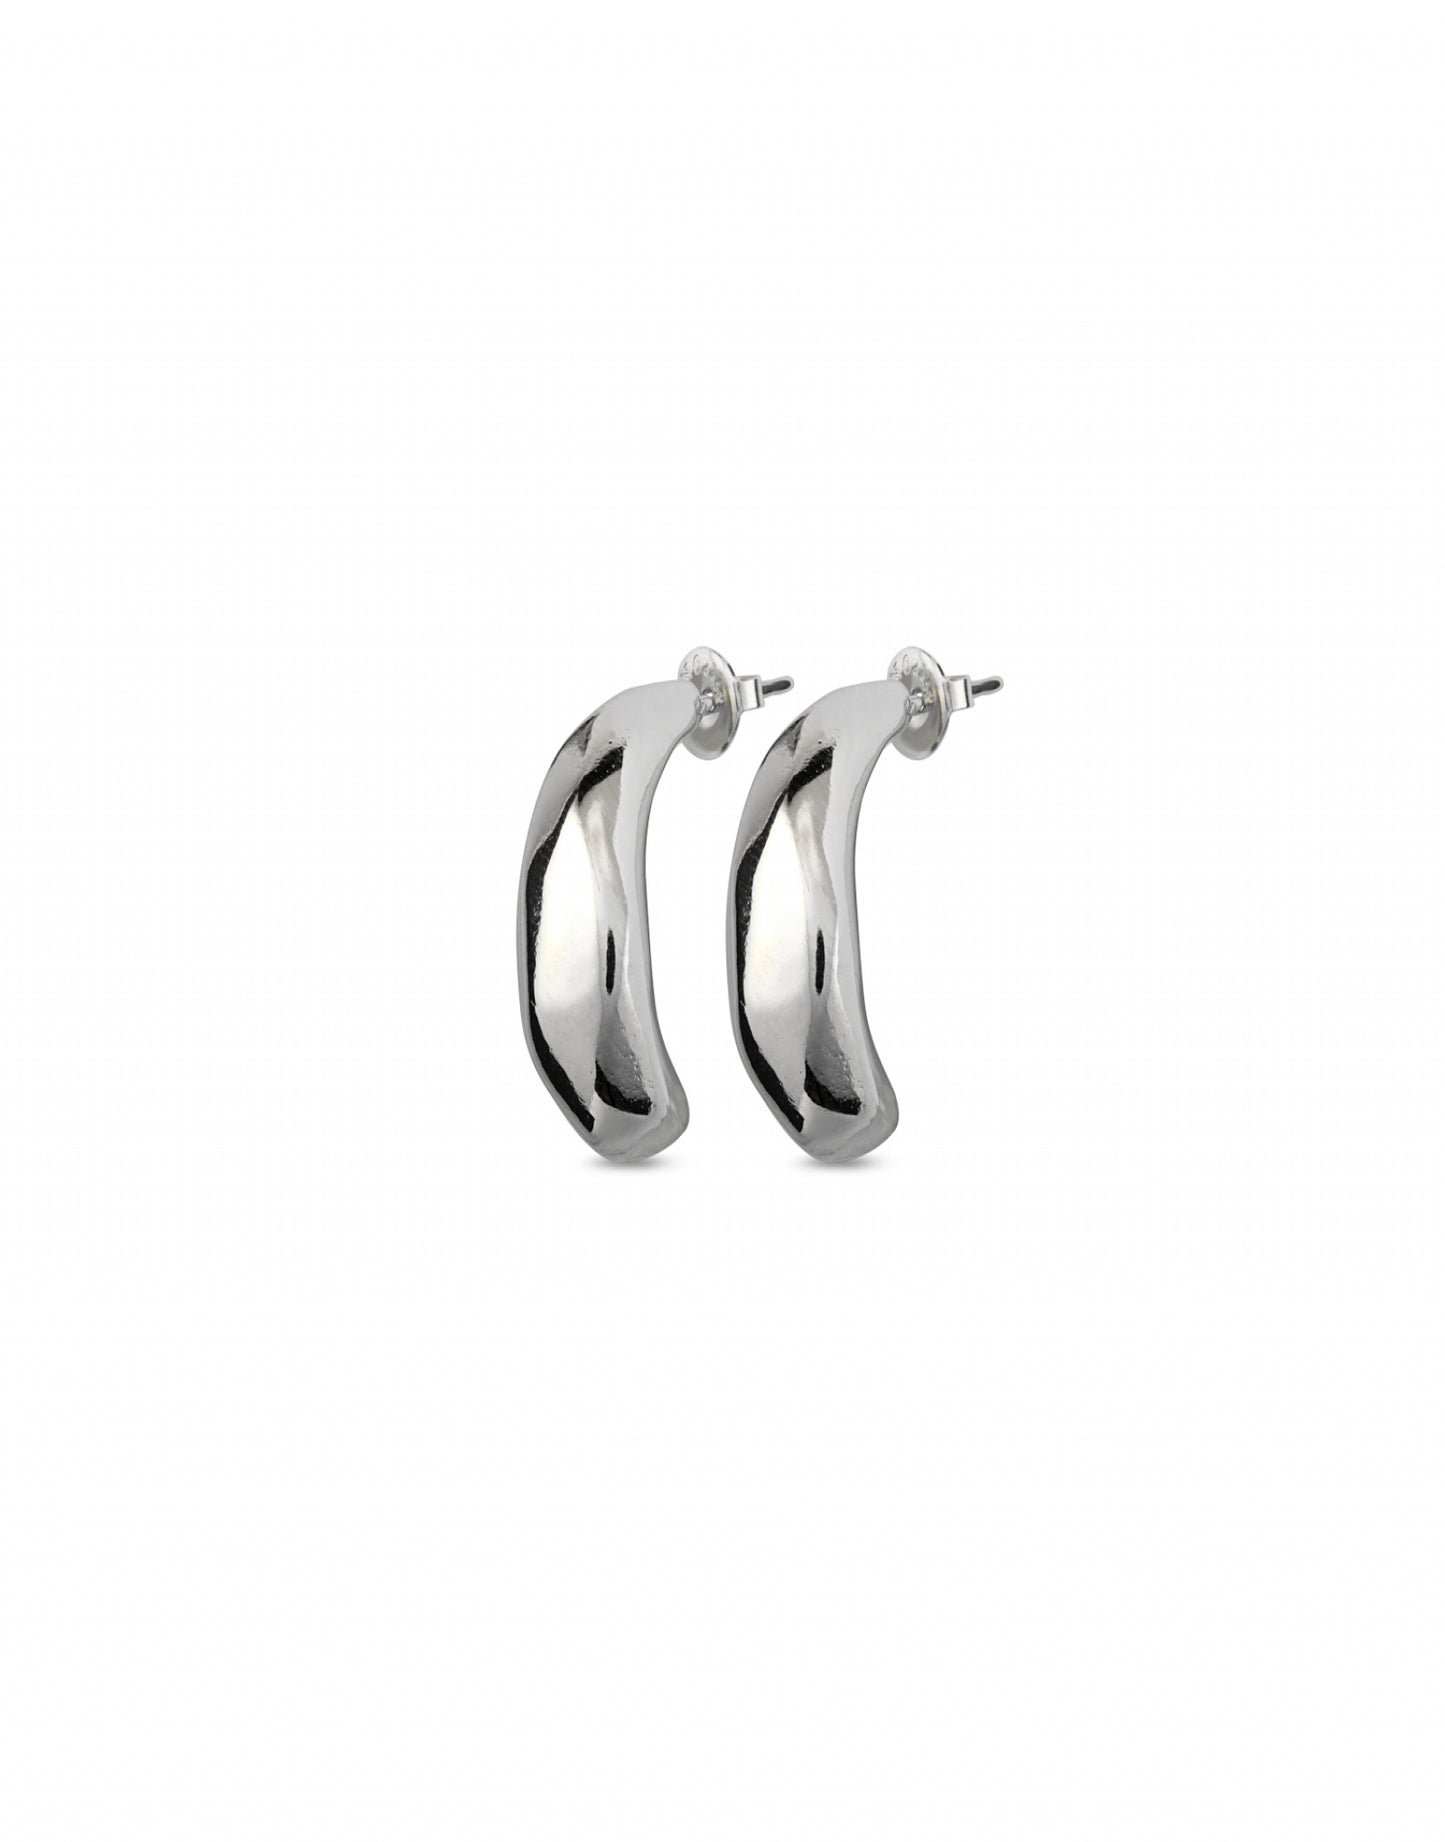 UNO DE 50 UNOde50 - Silver Drops Earrings available at The Good Life Boutique